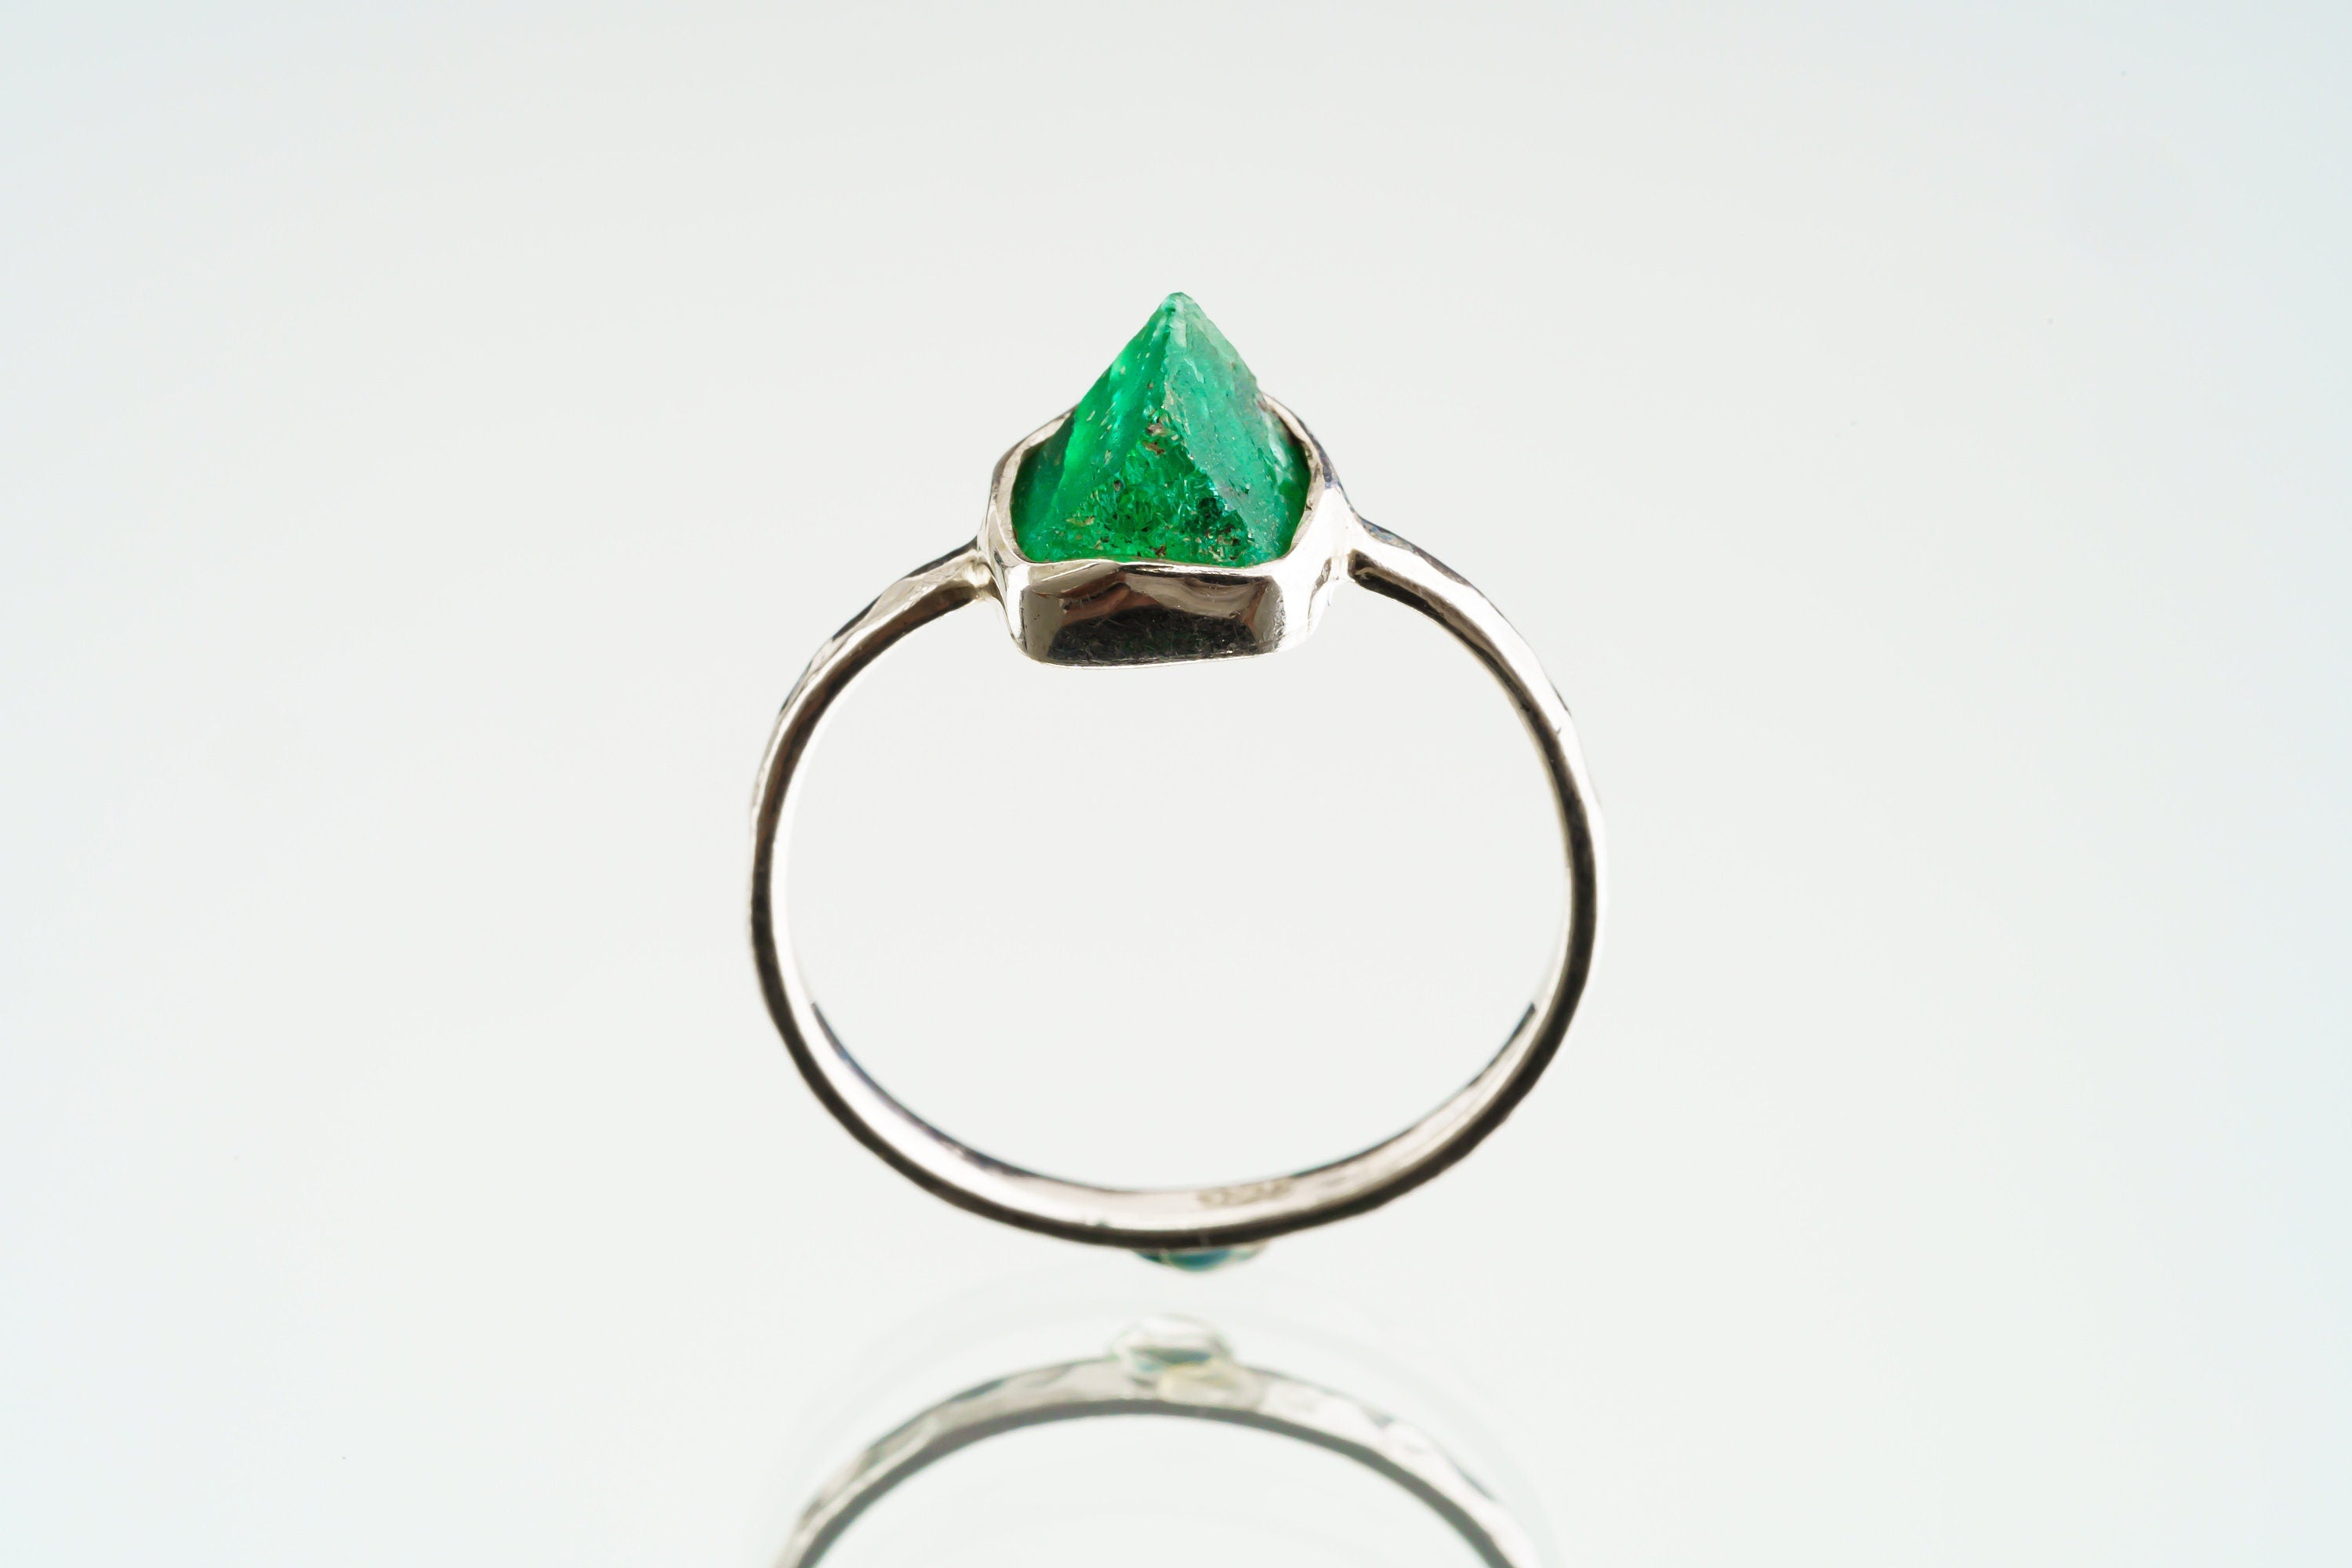 Gemmy Australian Fossicked rough Emerald - Stack Crystal Ring - Size 5 US - 925 Sterling Silver - Thin Band Hammer Textured